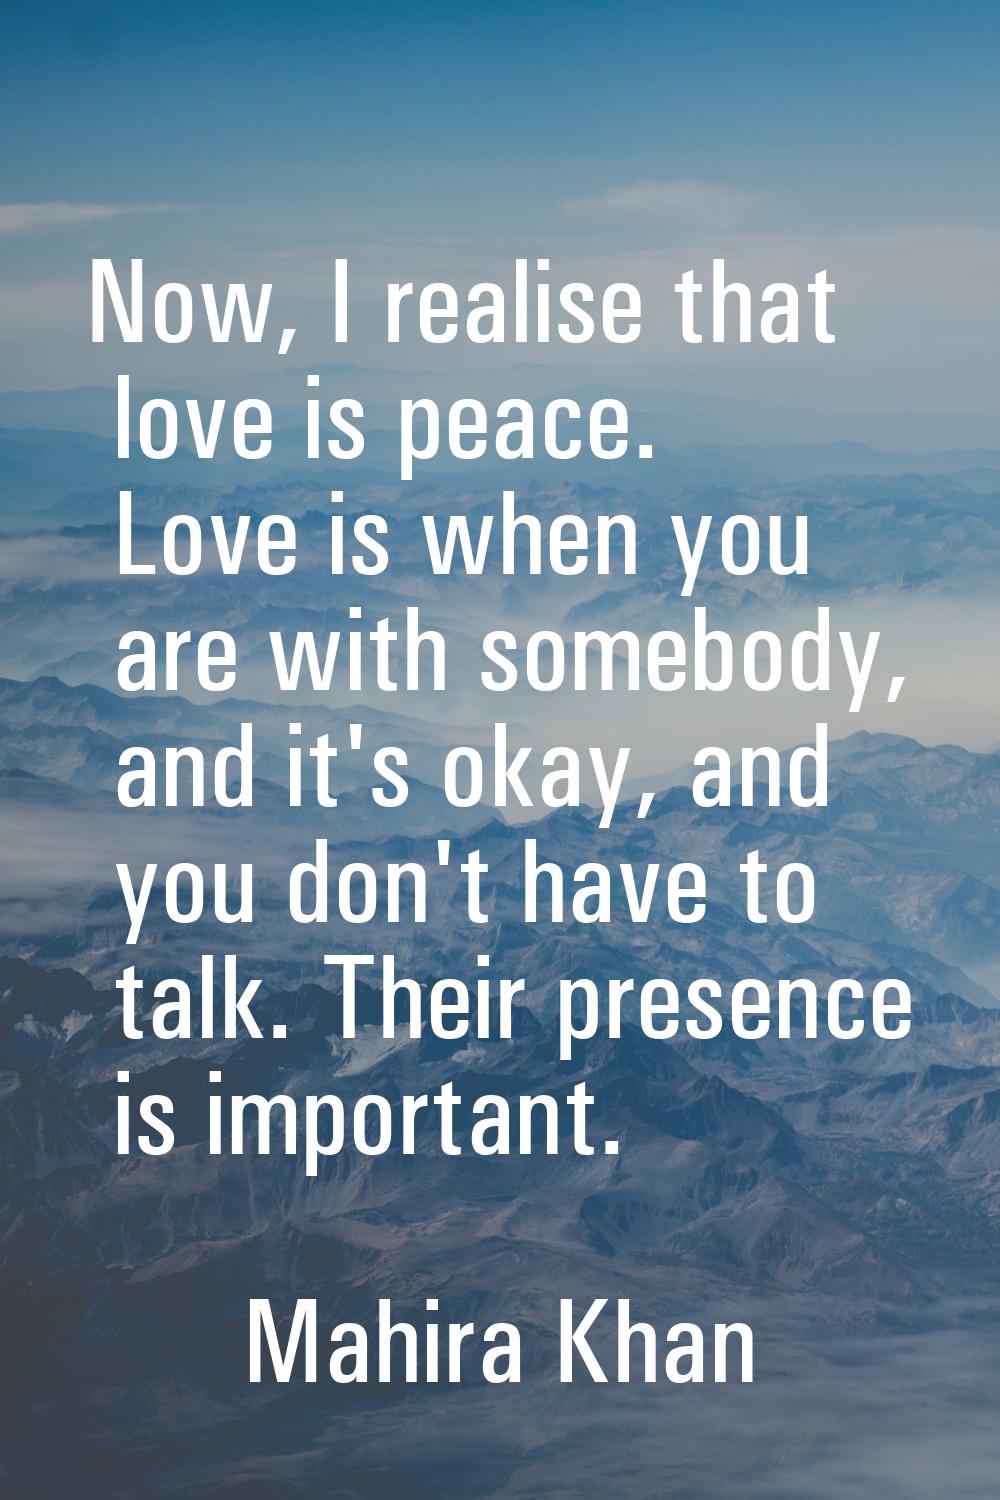 Now, I realise that love is peace. Love is when you are with somebody, and it's okay, and you don't